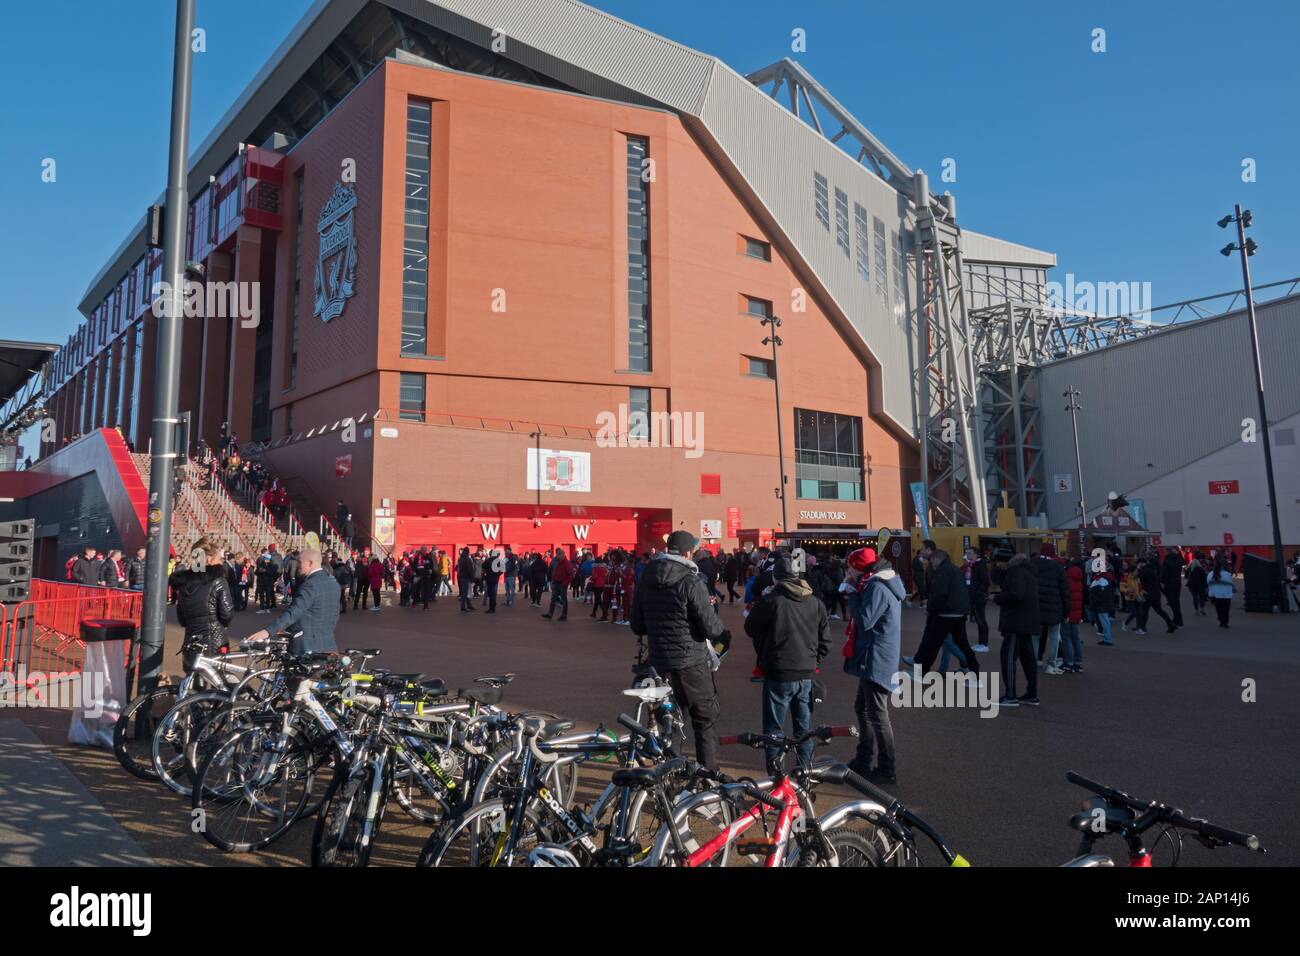 Liverpool fans gather in the fan park prior to a Premier League game at Anfield against Man Utd. Stock Photo